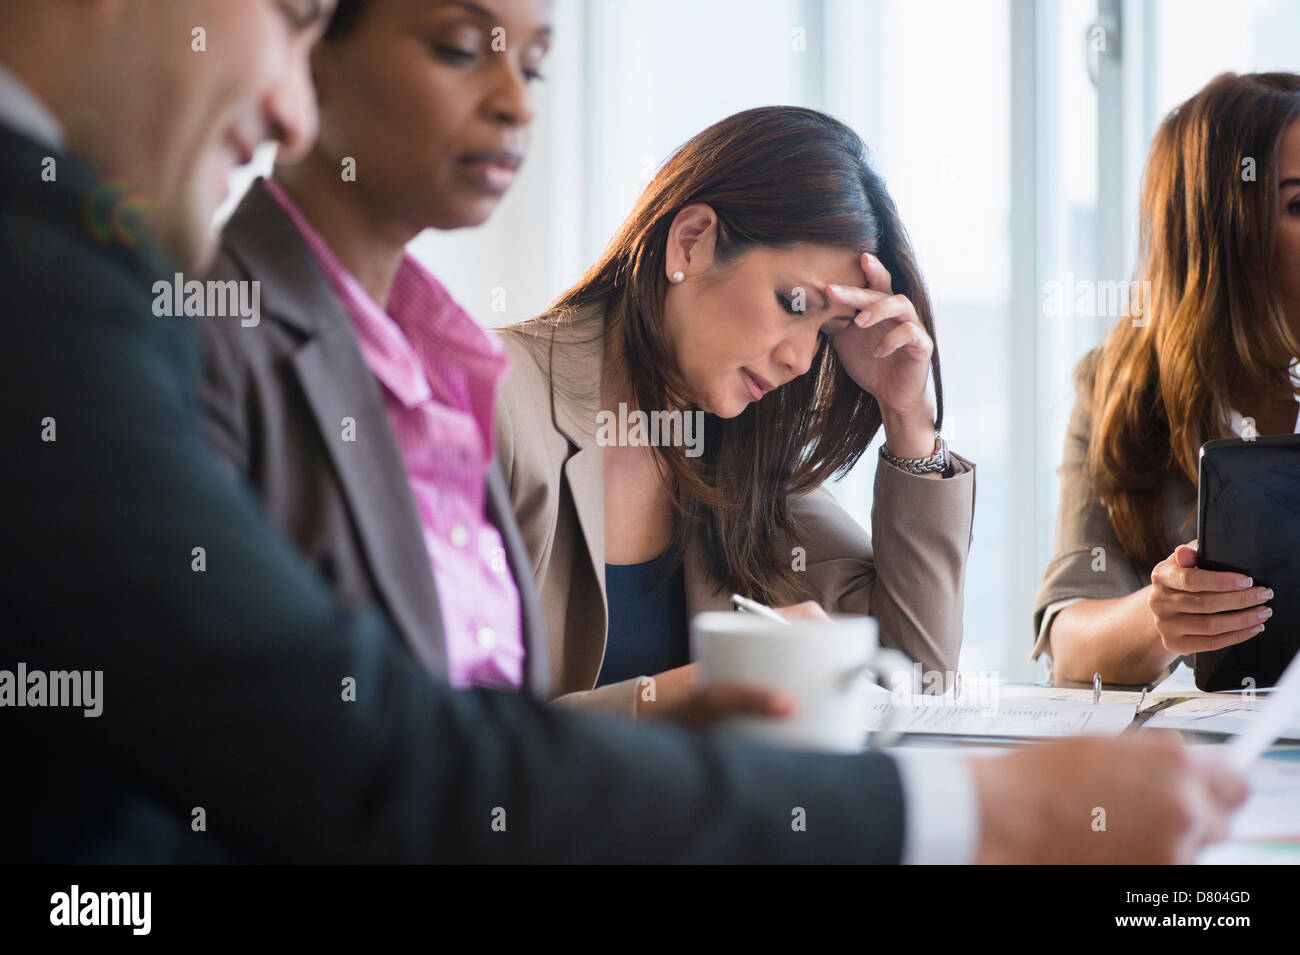 Businesswoman making notes in meeting Banque D'Images